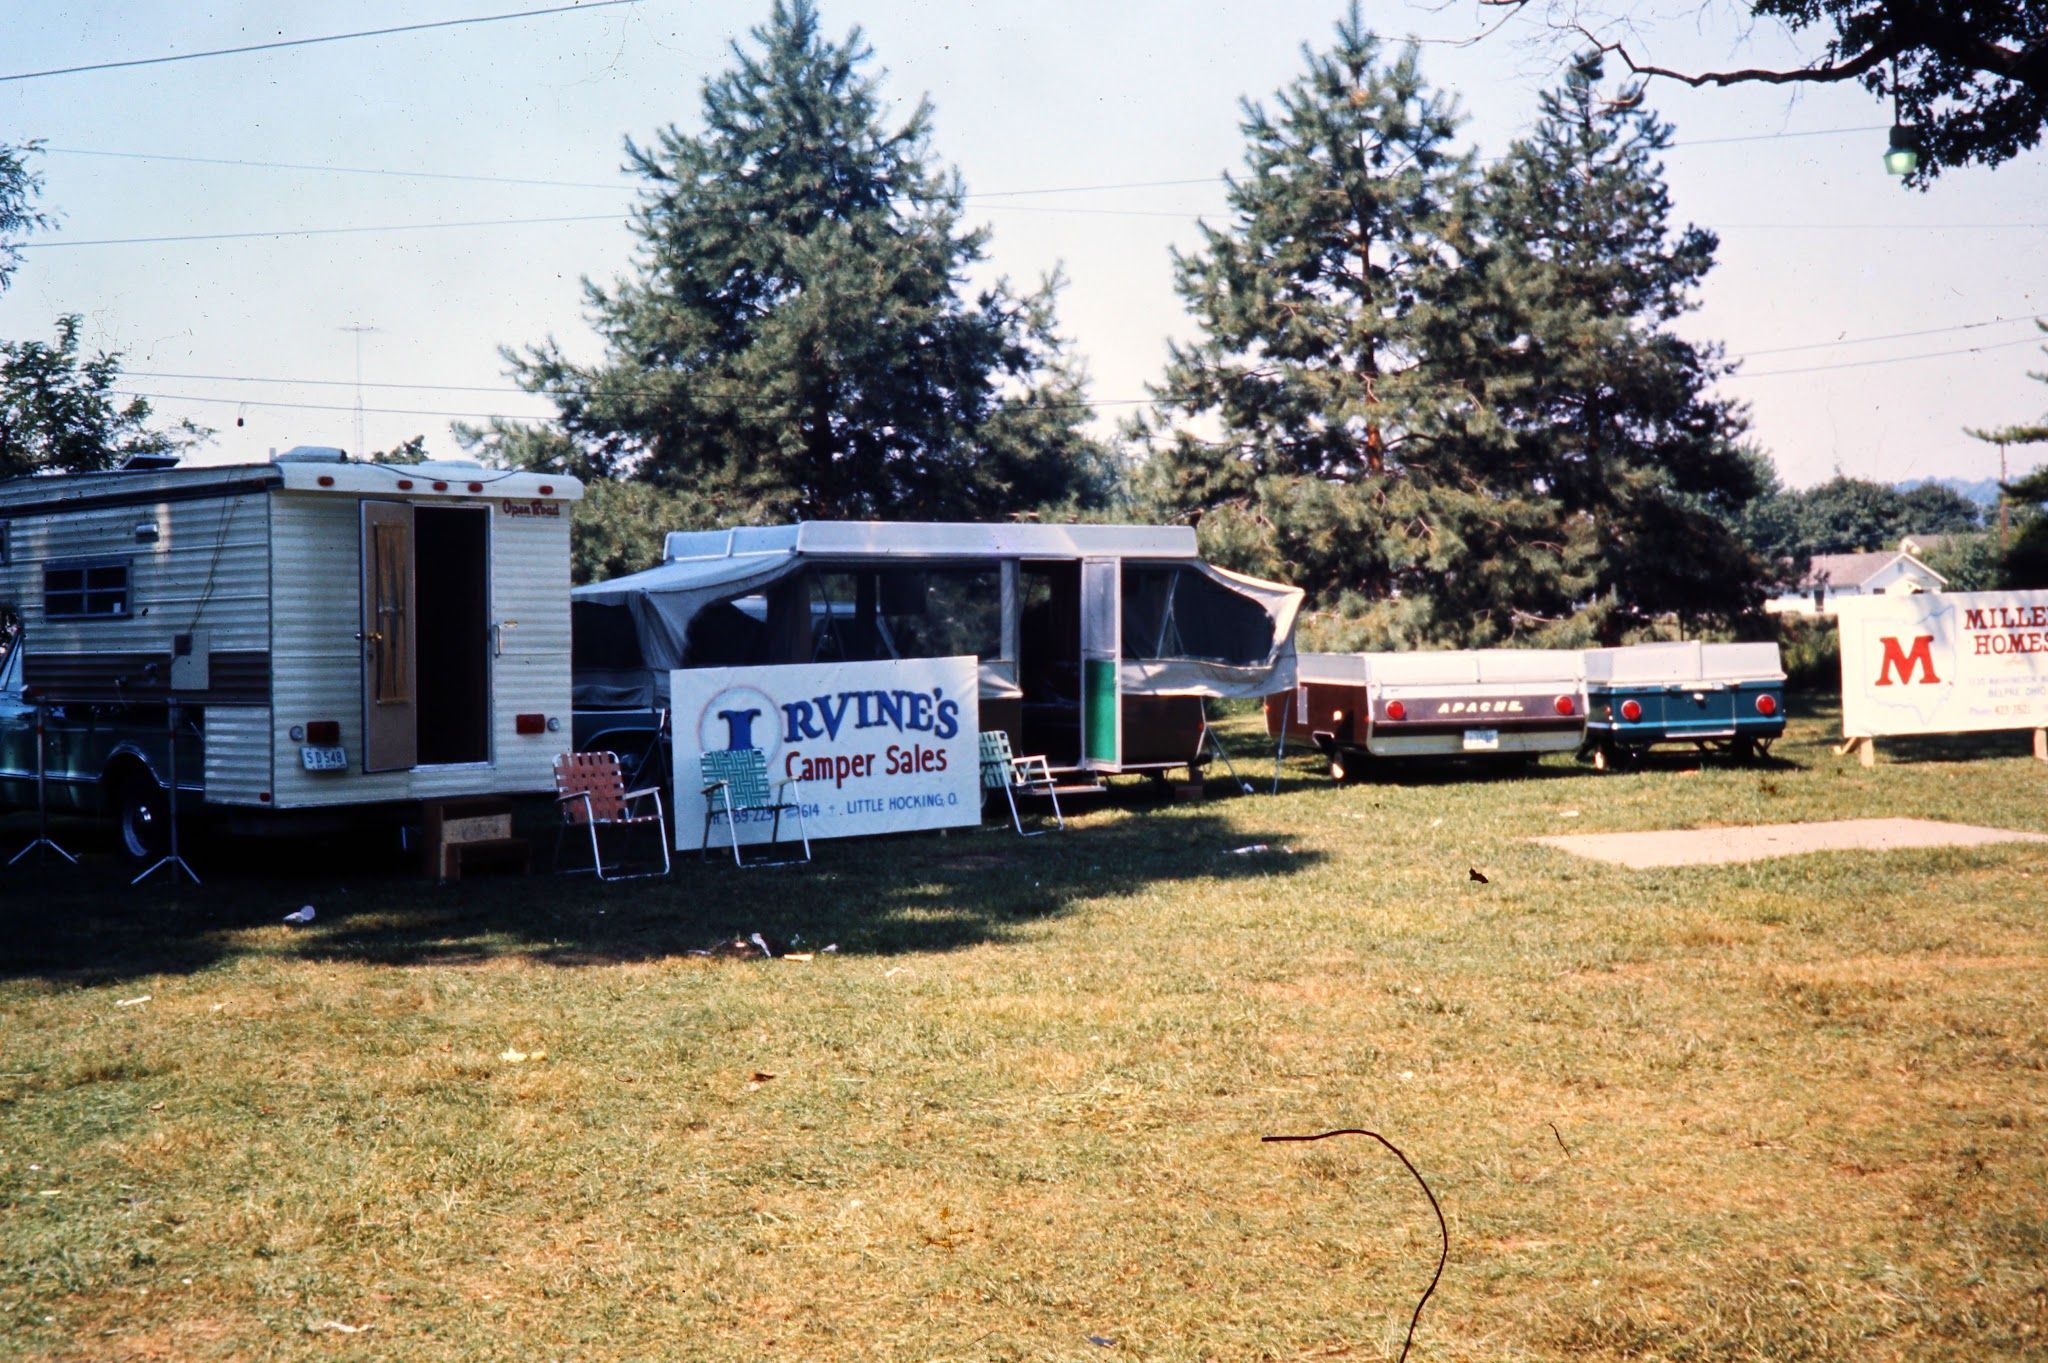 Services & Products Irvine's Camper Sales in Little Hocking OH